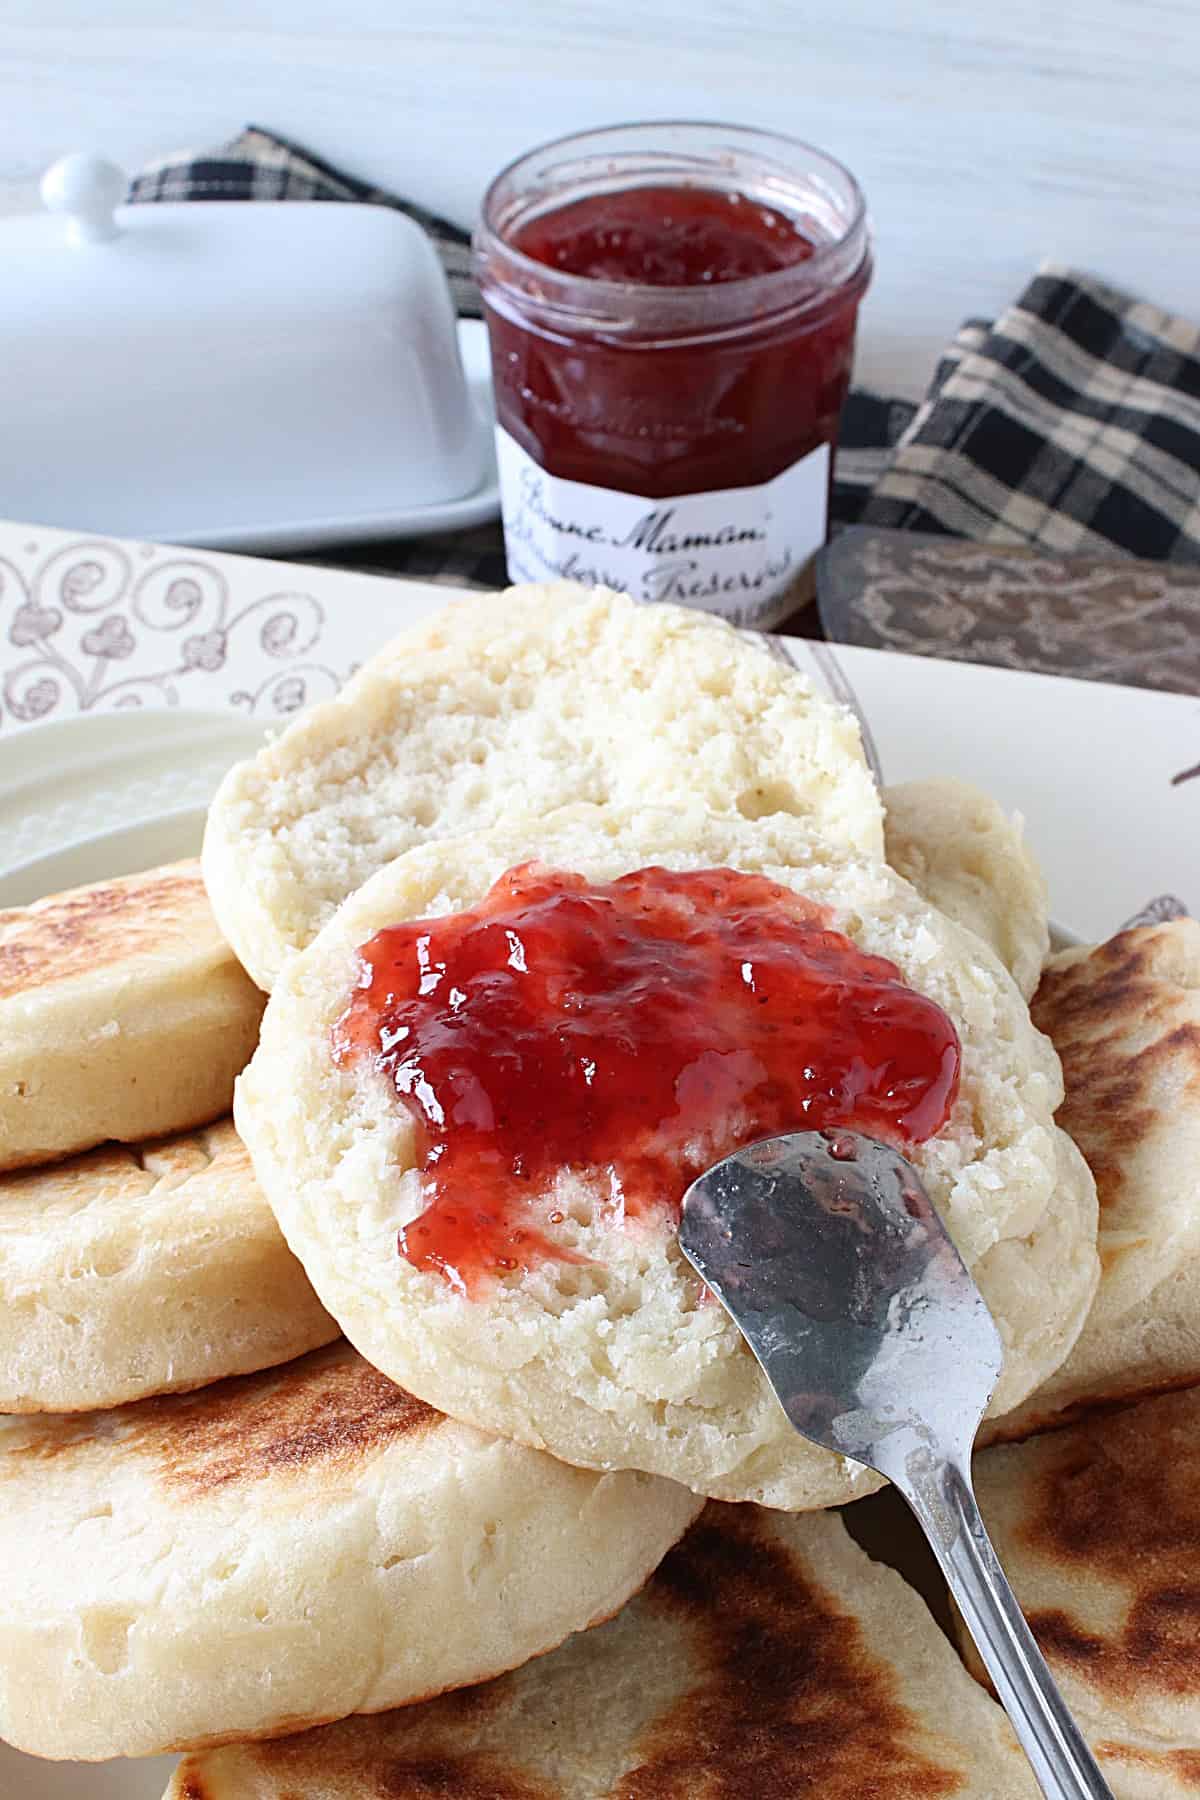 A jam spoon smearing strawberry jam on a Homemade English Crumpet.
